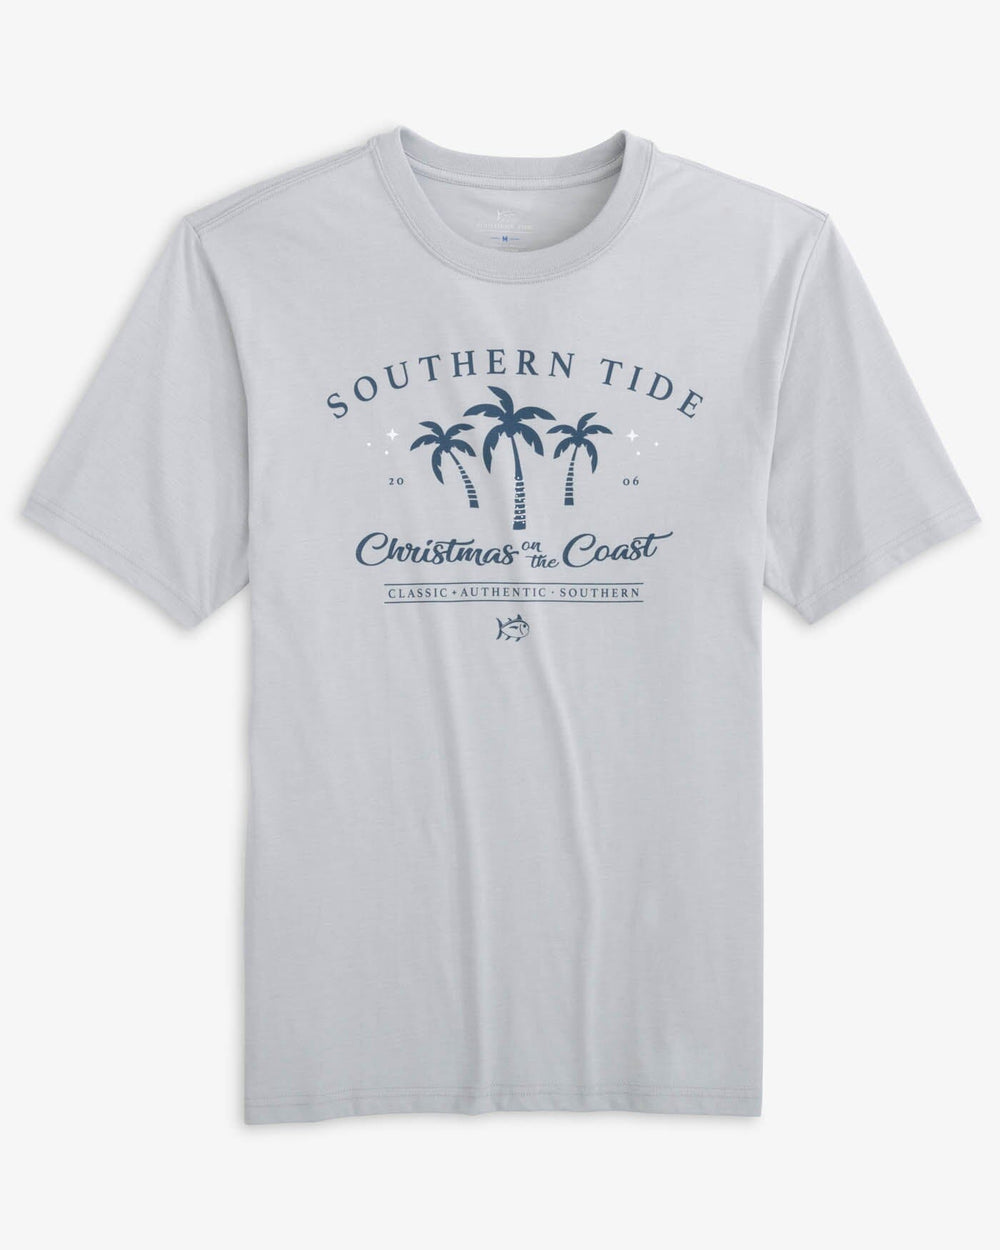 The front view of the Southern Tide Heather Christmas on the Coast Short Sleeve T-shirt by Southern Tide - Heather Slate Grey